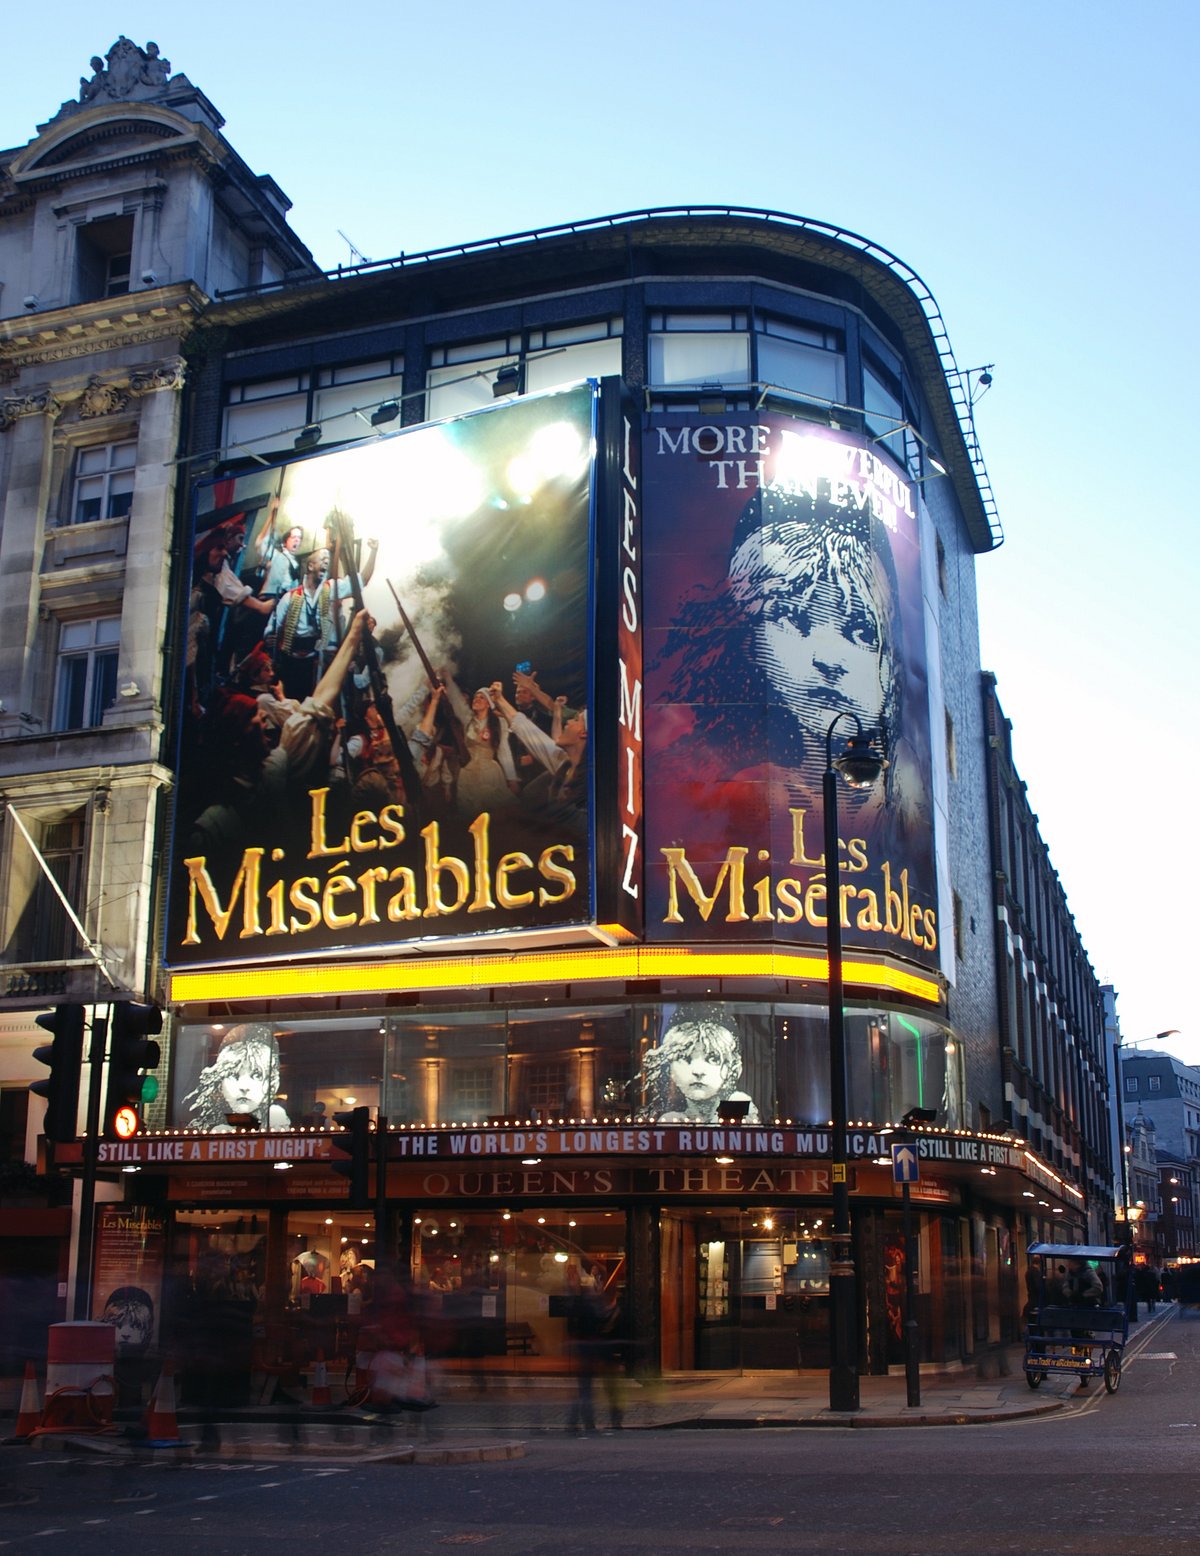 weekend theatre trips to london